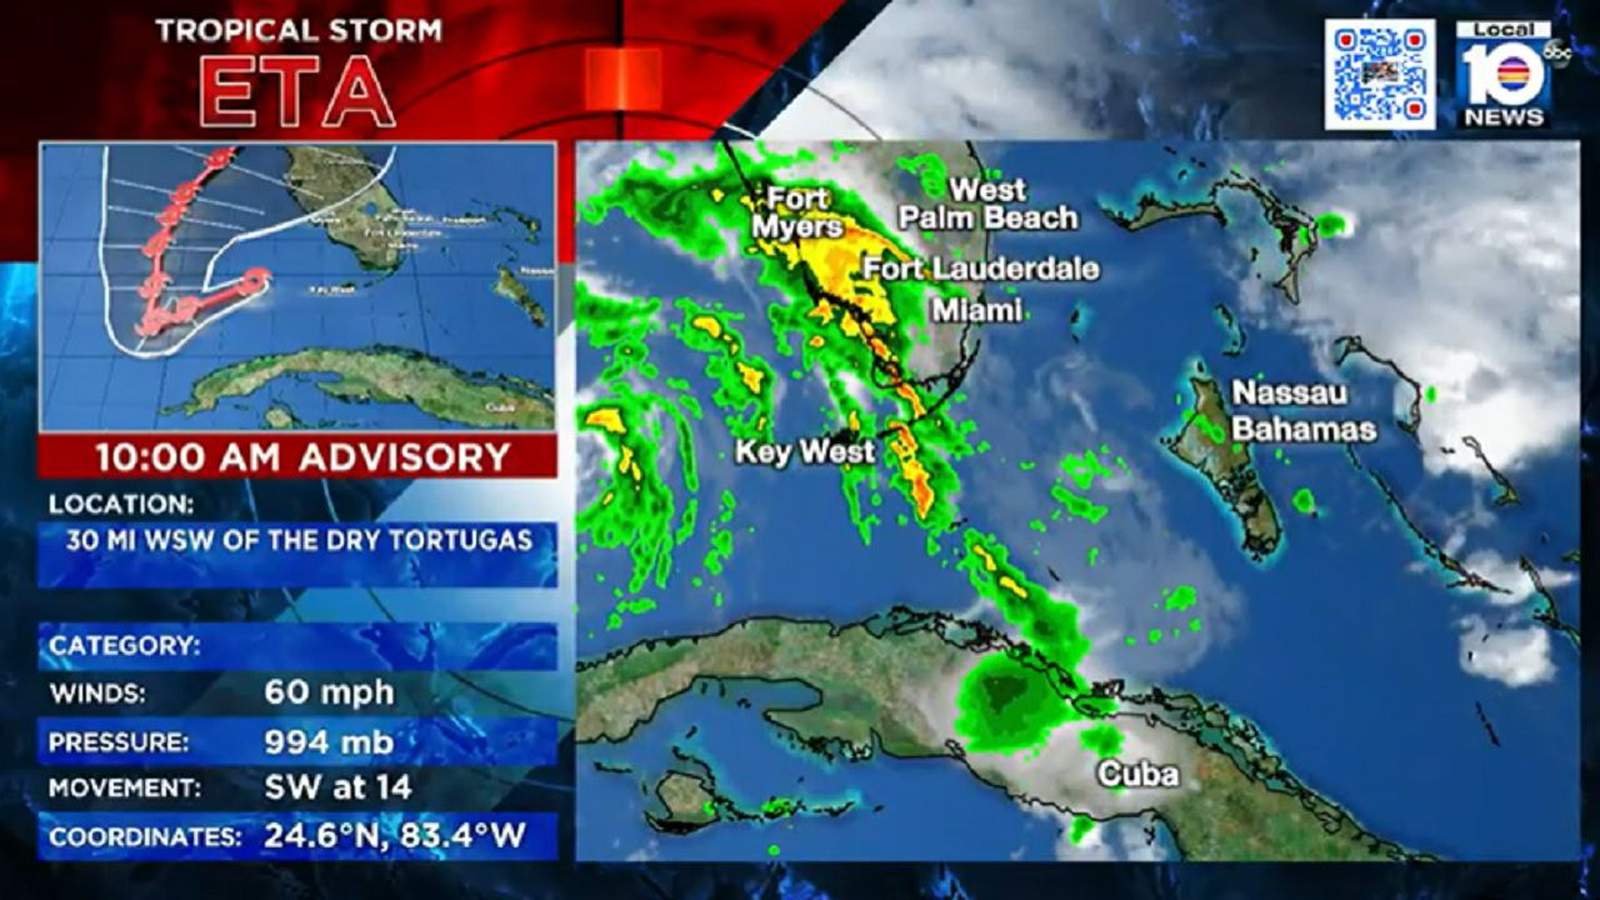 LIVE RADAR: Tropical Storm Eta moving to Gulf, but remnants remain in South Florida